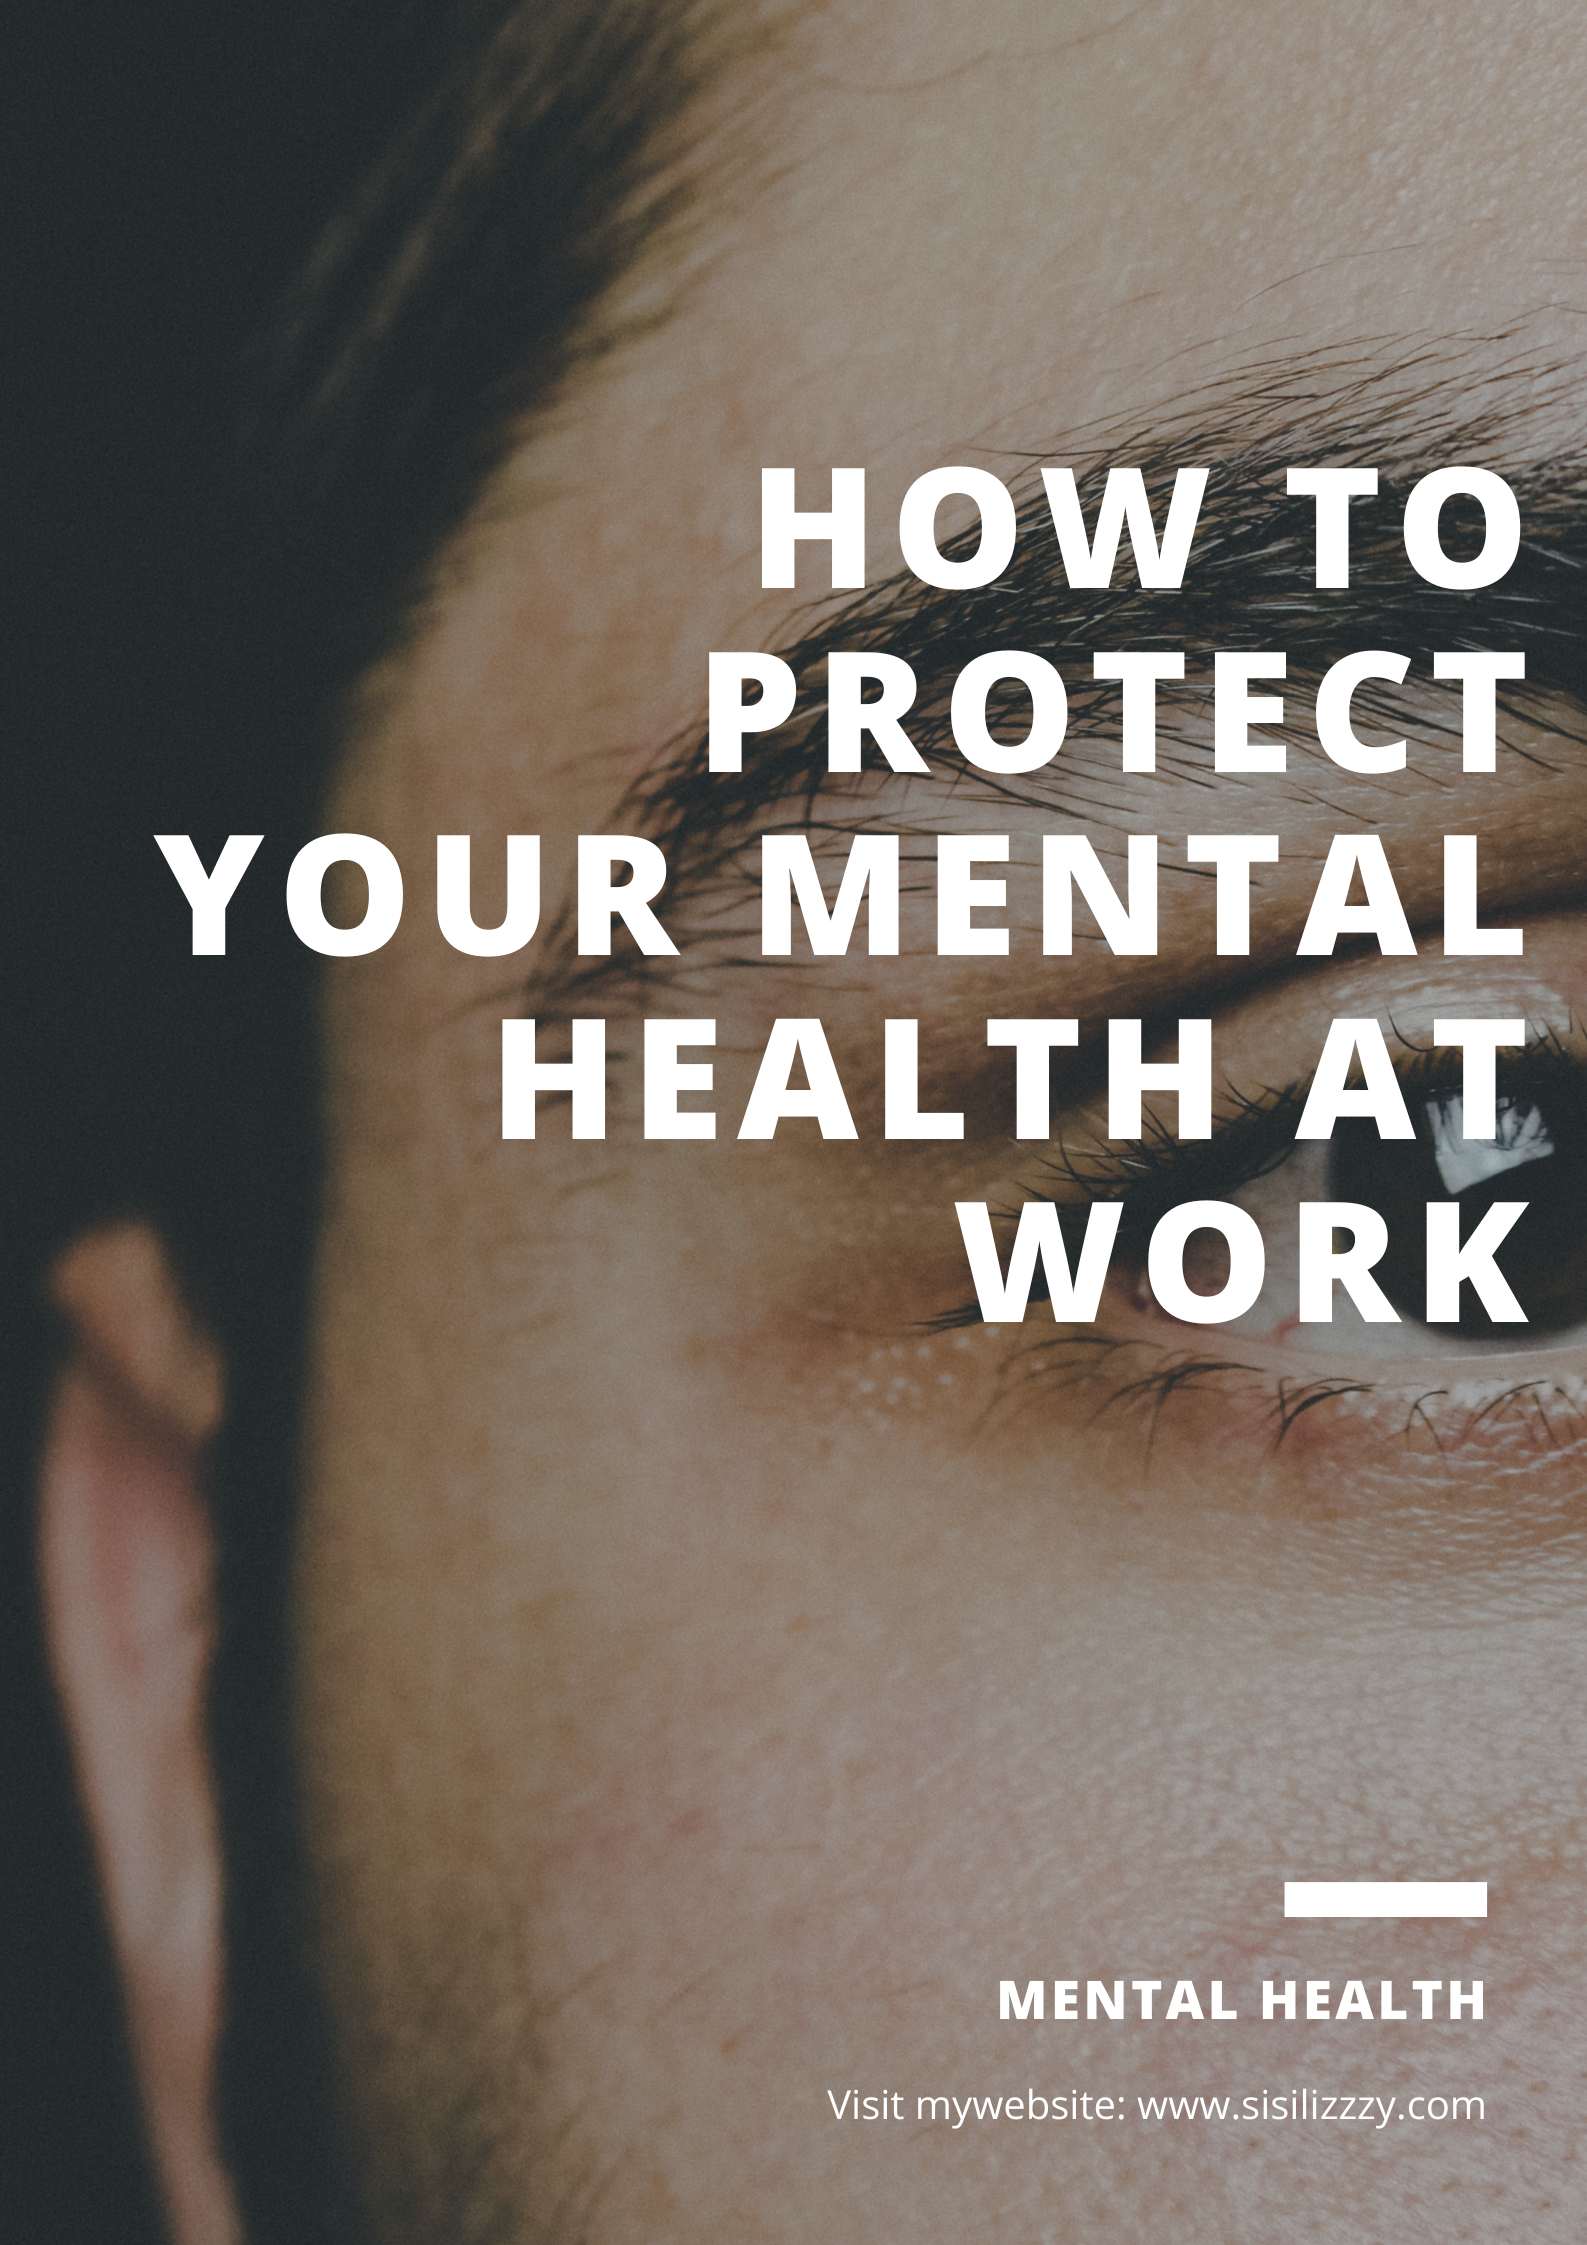 How to protect your mental health at work